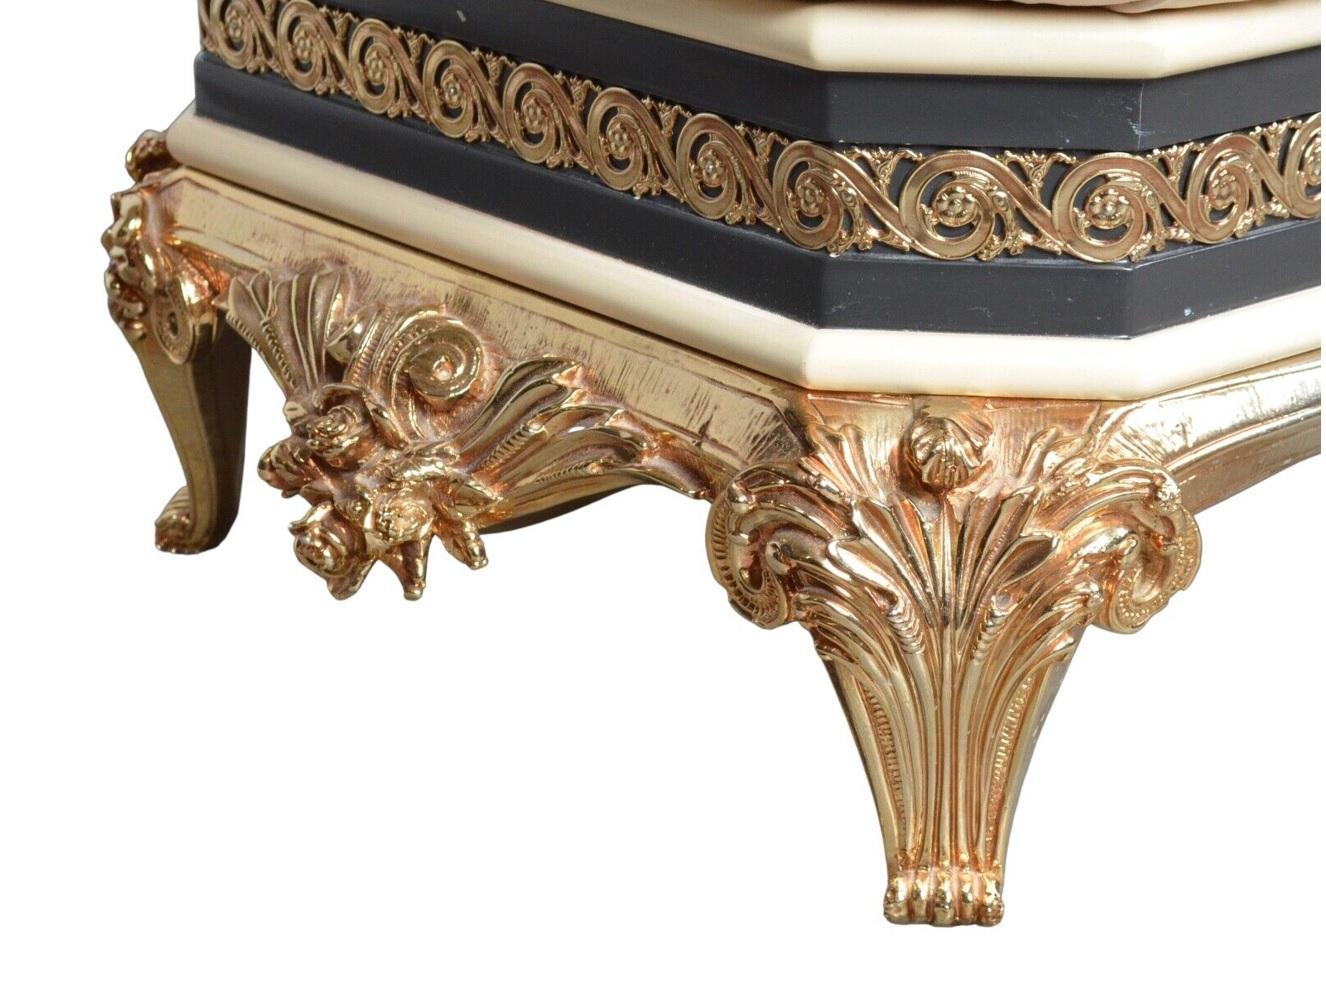 Leather Exclusive Rococo Vidal Grau Footstool, C 1970 / Matching Furniture Available For Sale